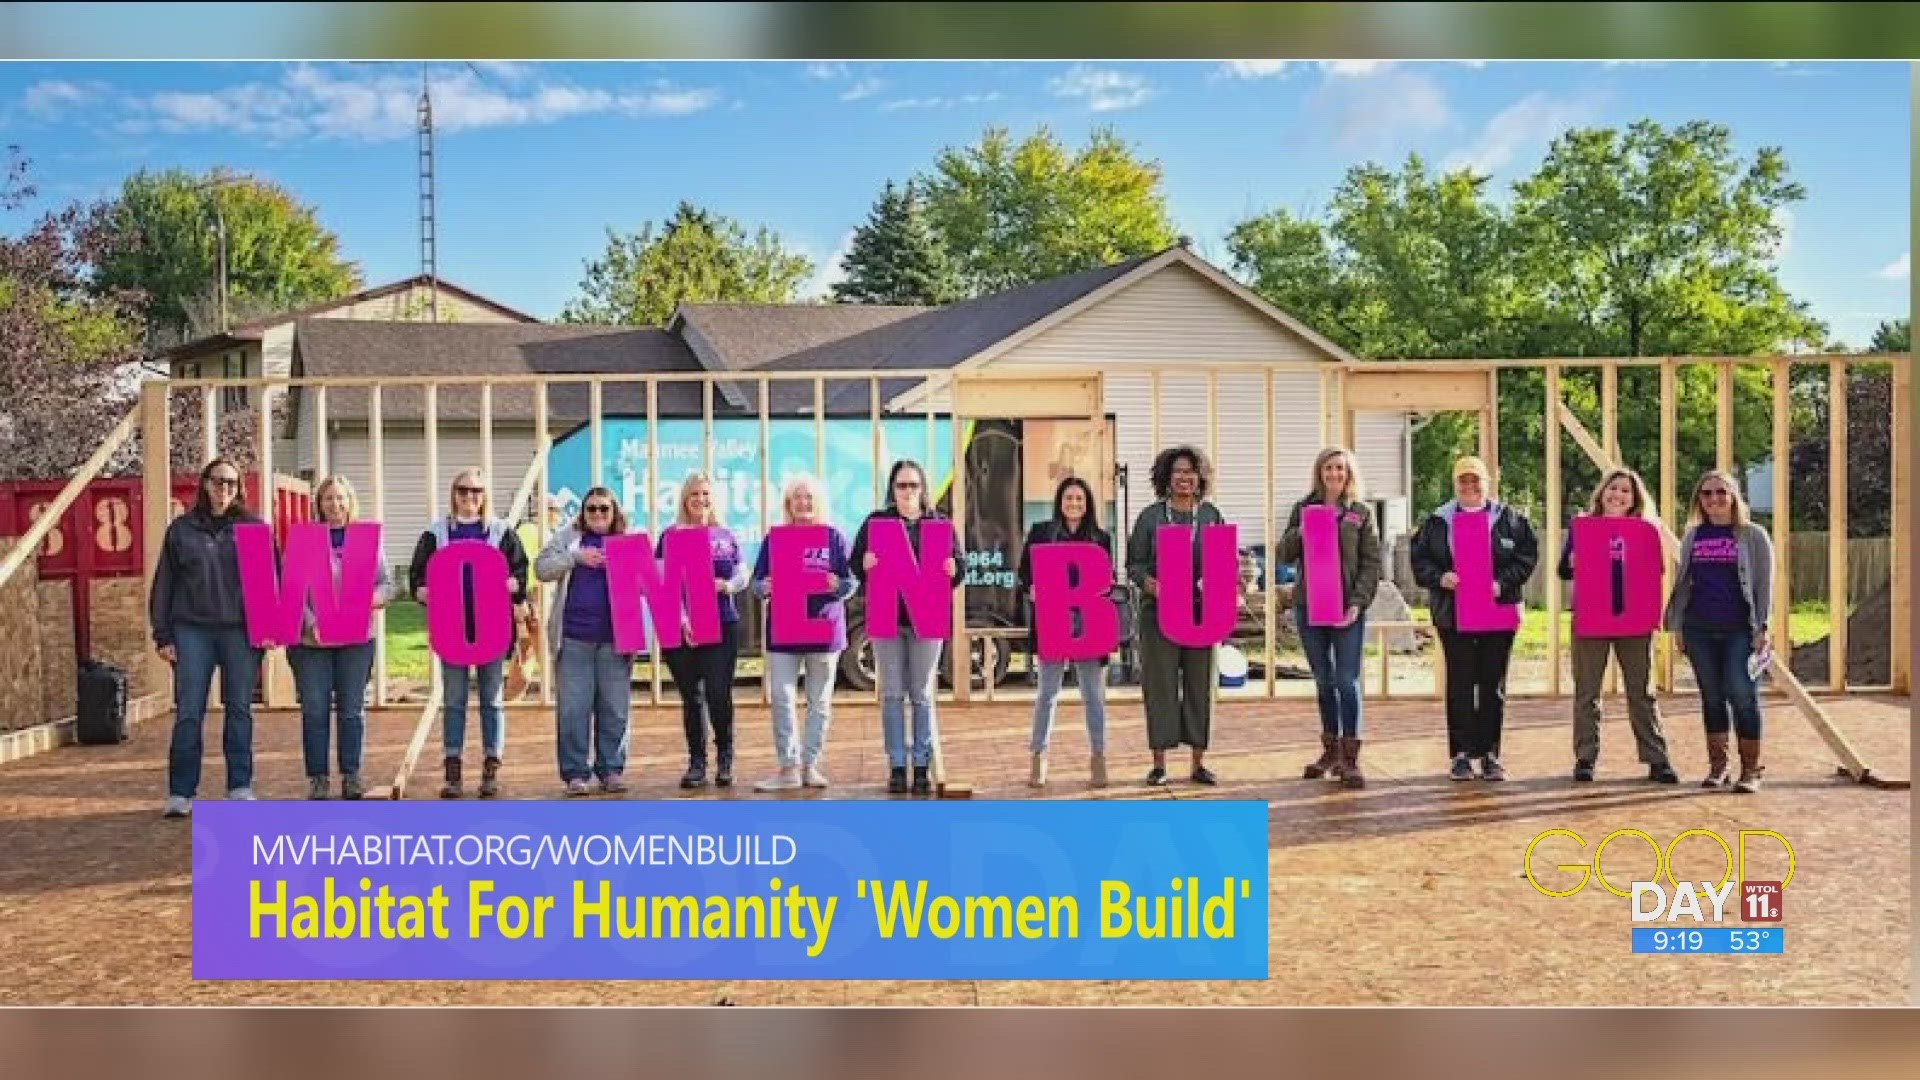 Nate Reid from Habitat for Humanity and Julie, a future homeowner, talk the 'Women's Build' and how the organization promotes gender equity and independence.